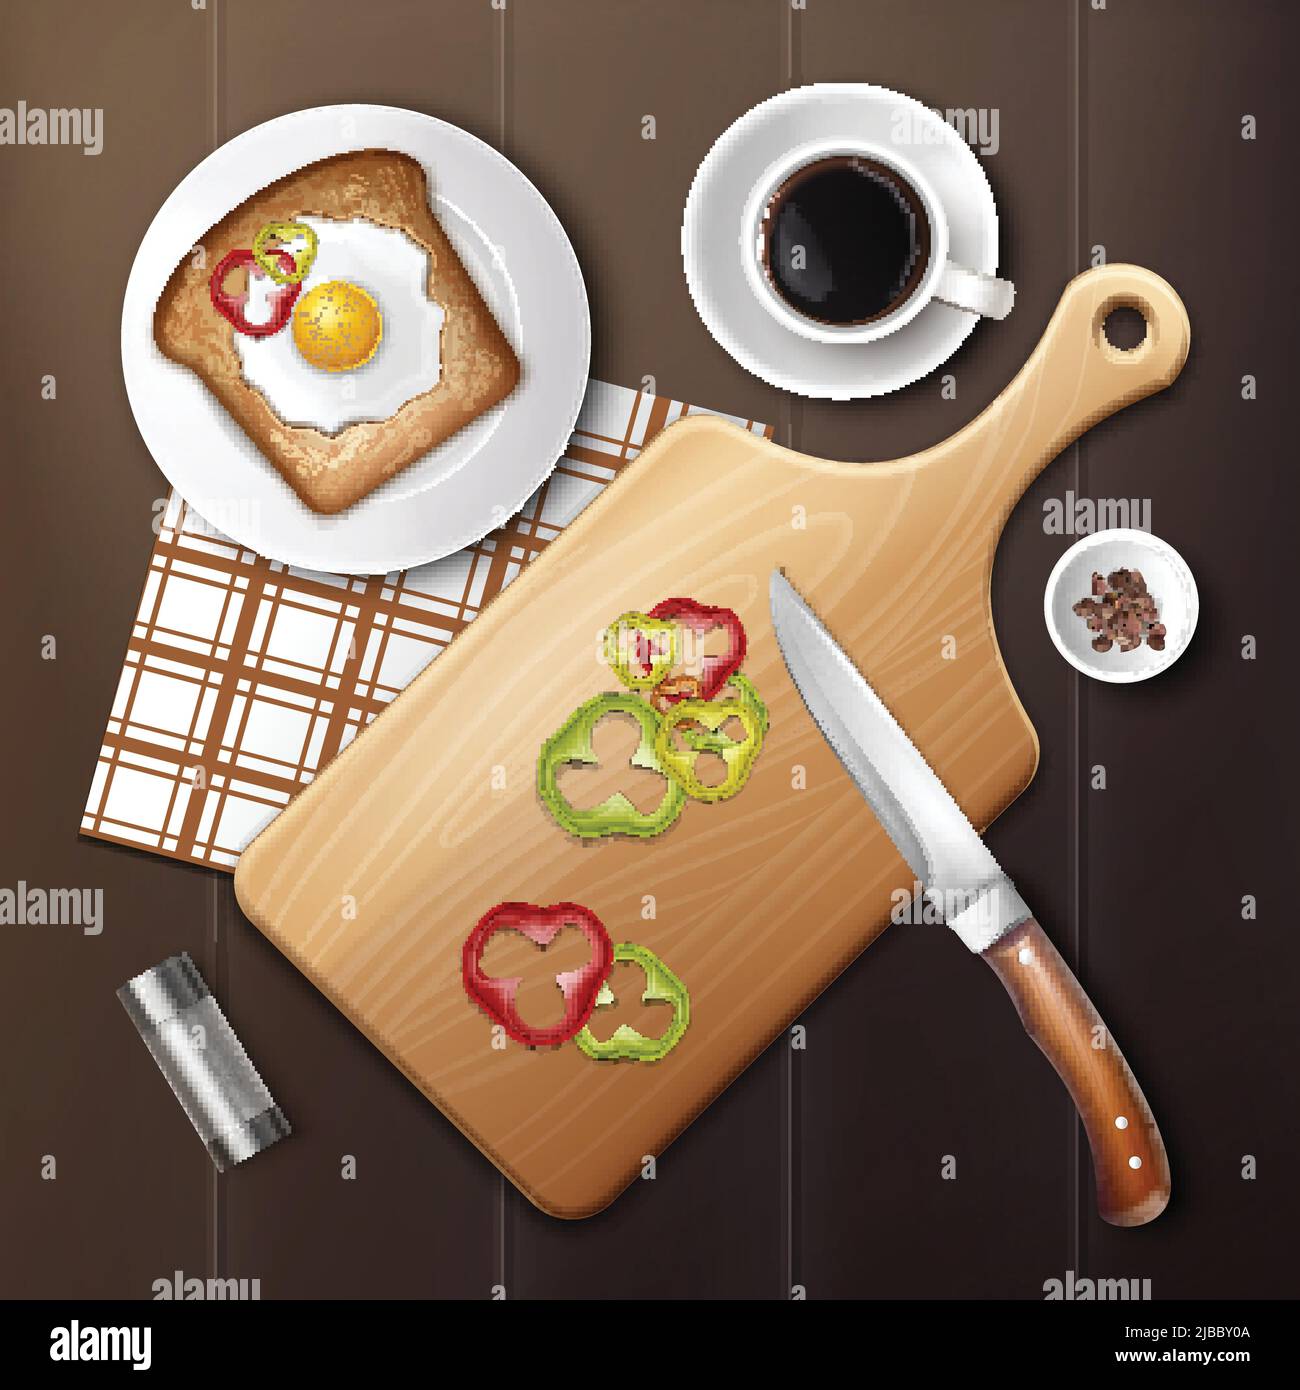 Vector illustration of tasty sandwich with egg and chopped bell pepper for breakfast on wooden table. Top view Stock Vector